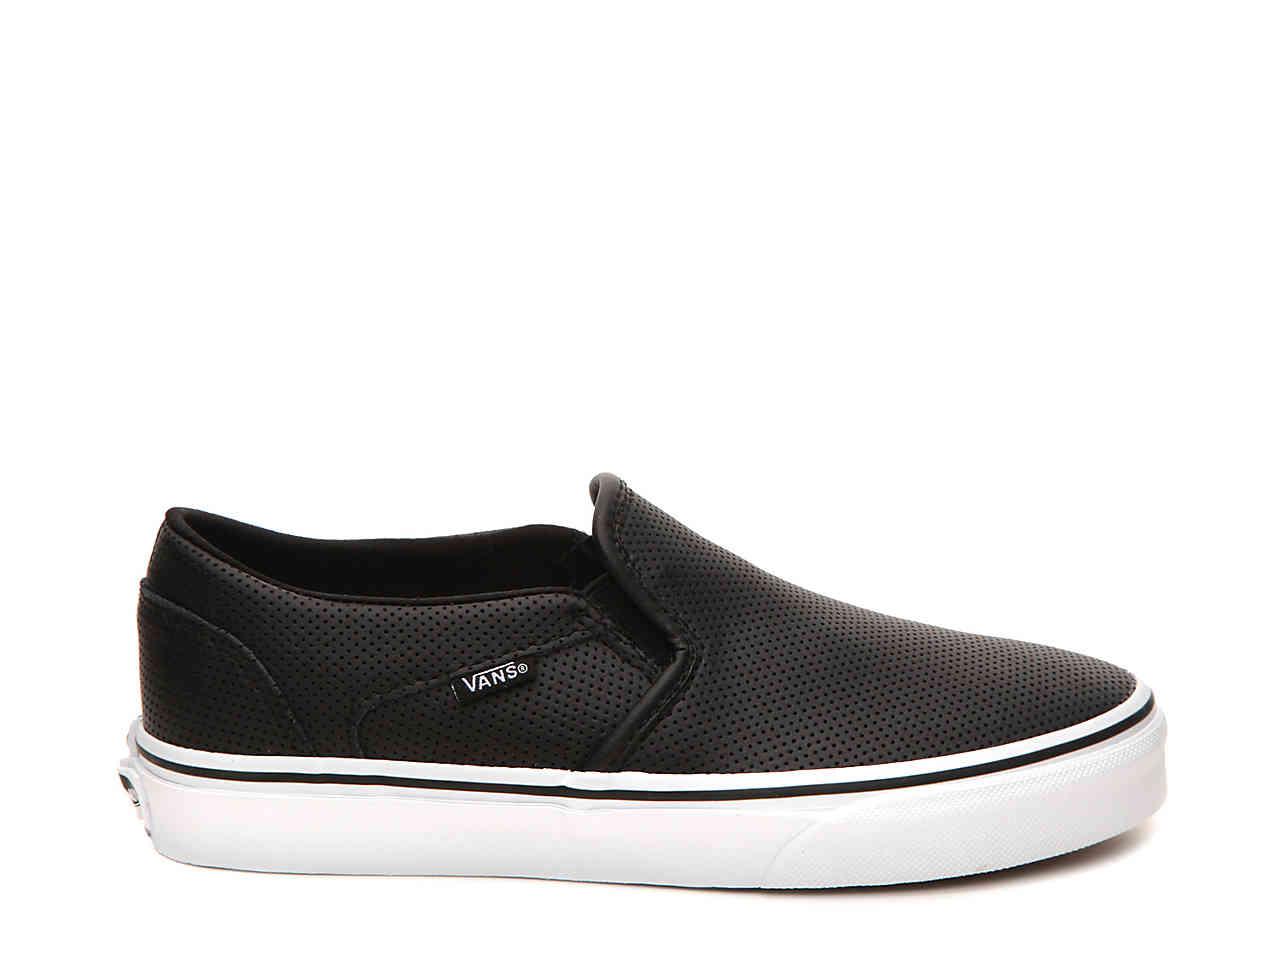 Vans Leather Asher Perforated Slip-on Sneaker in Black - Lyst